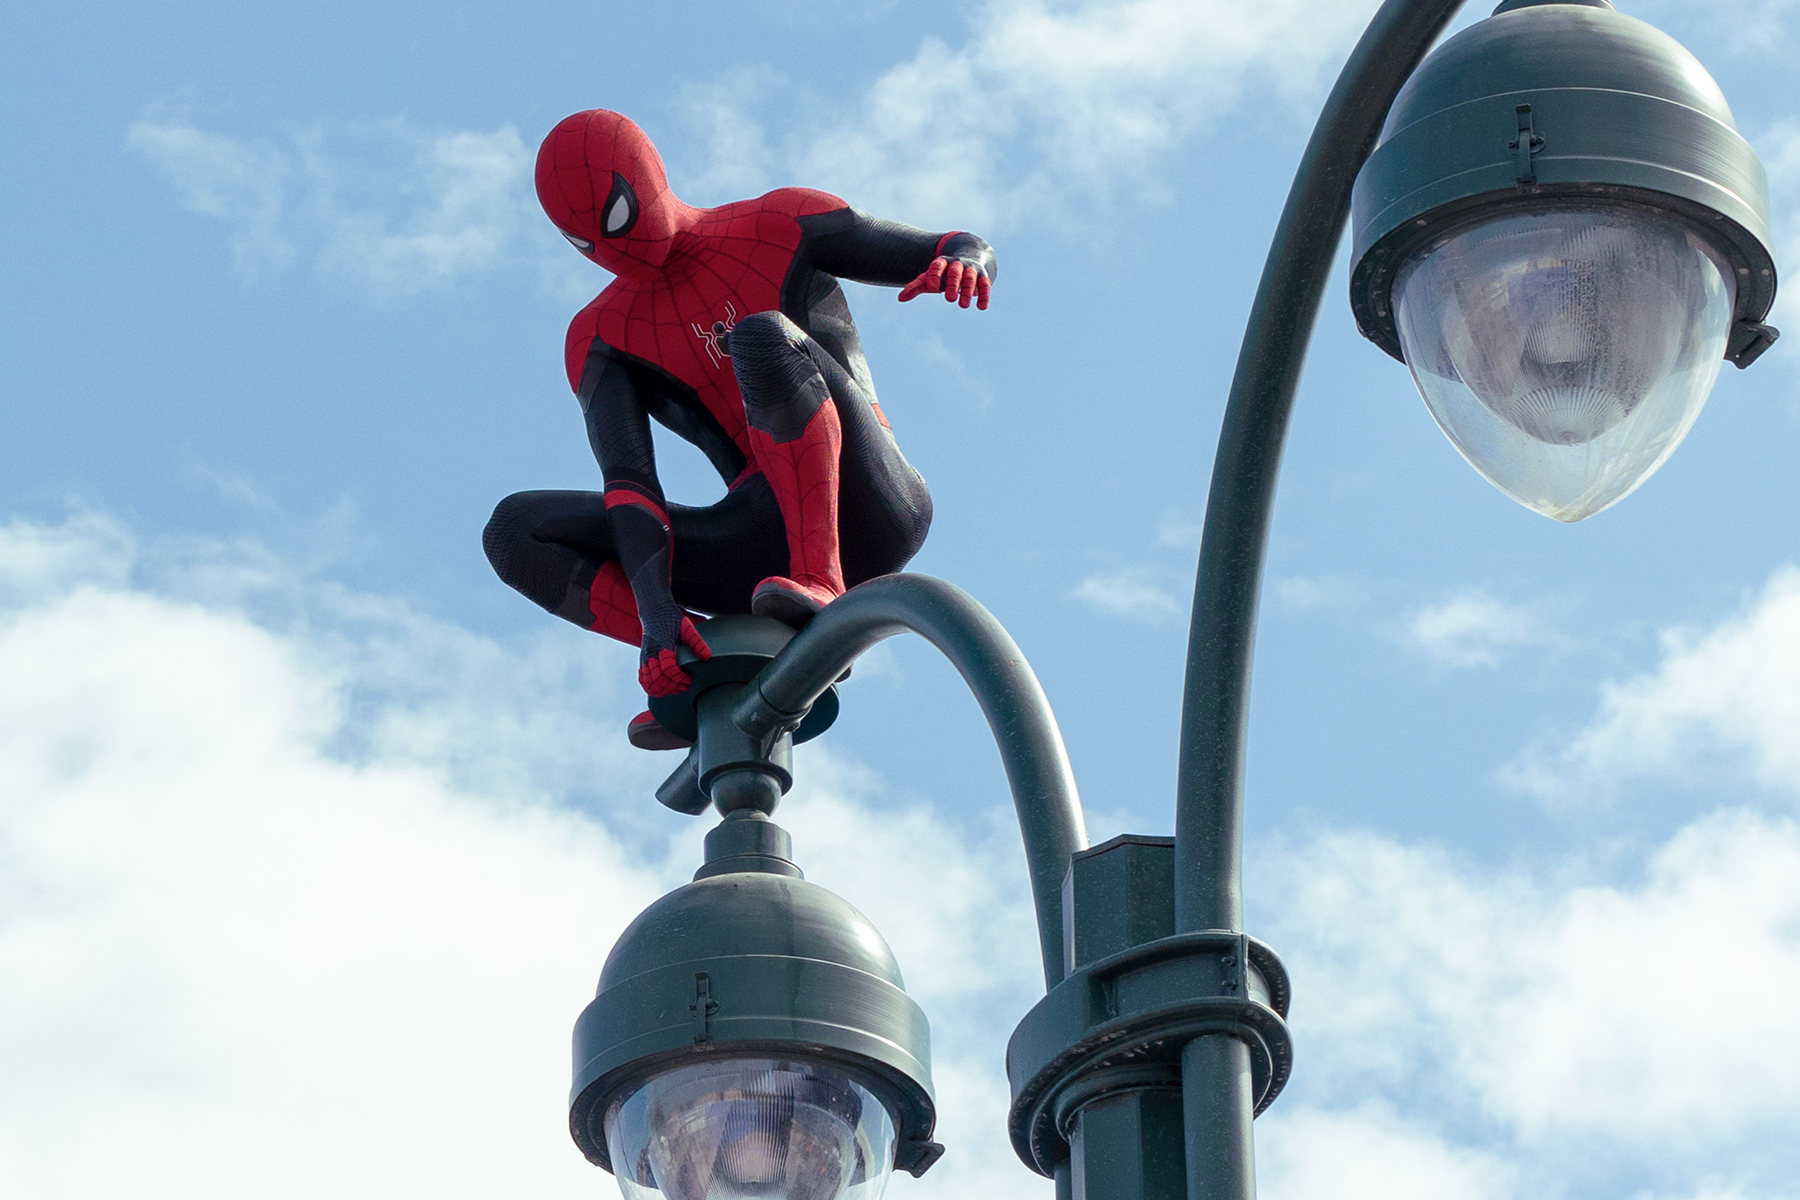 It’s time to talk about ‘Spider-Man’ now